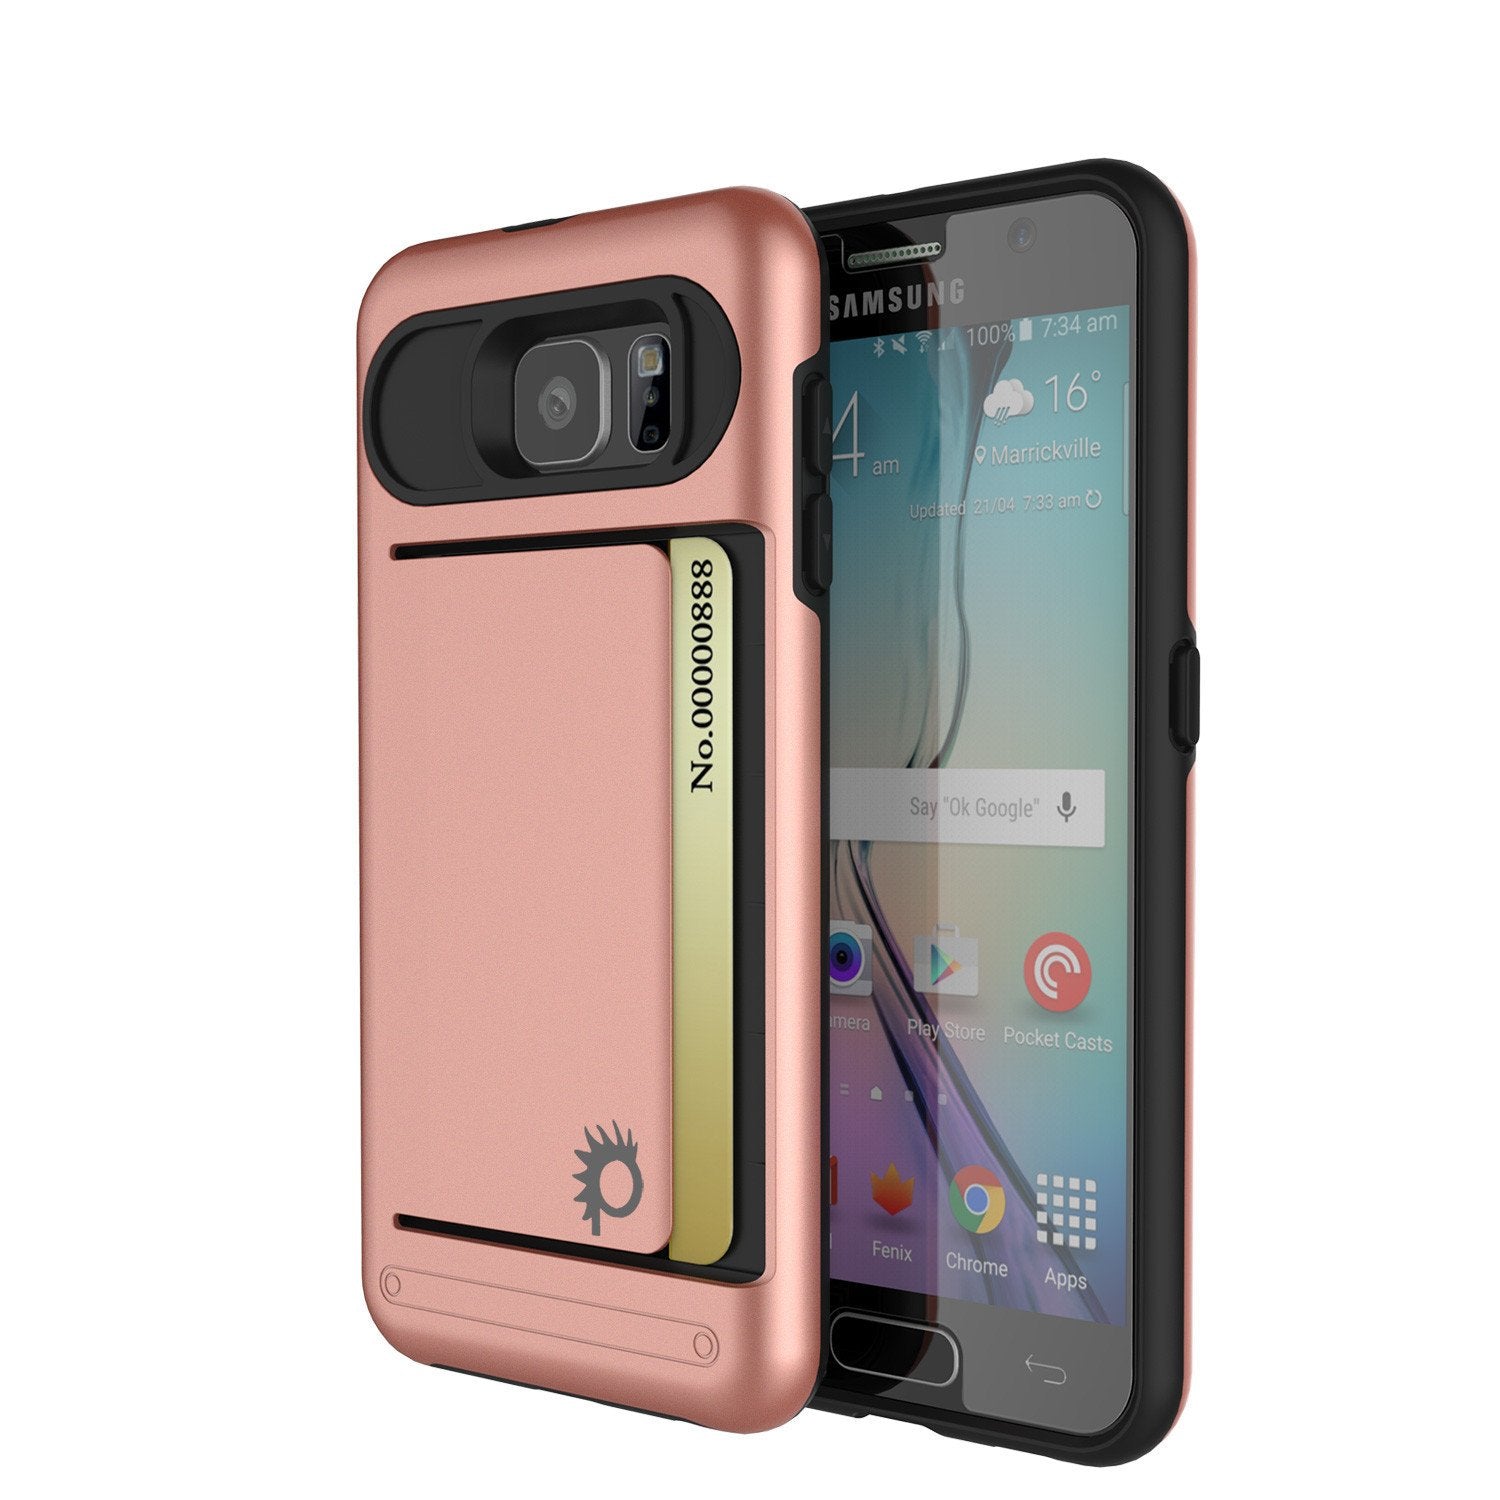 Galaxy S6 EDGE Case PunkCase CLUTCH Rose Gold Series Slim Armor Soft Cover Case w/ Screen Protector